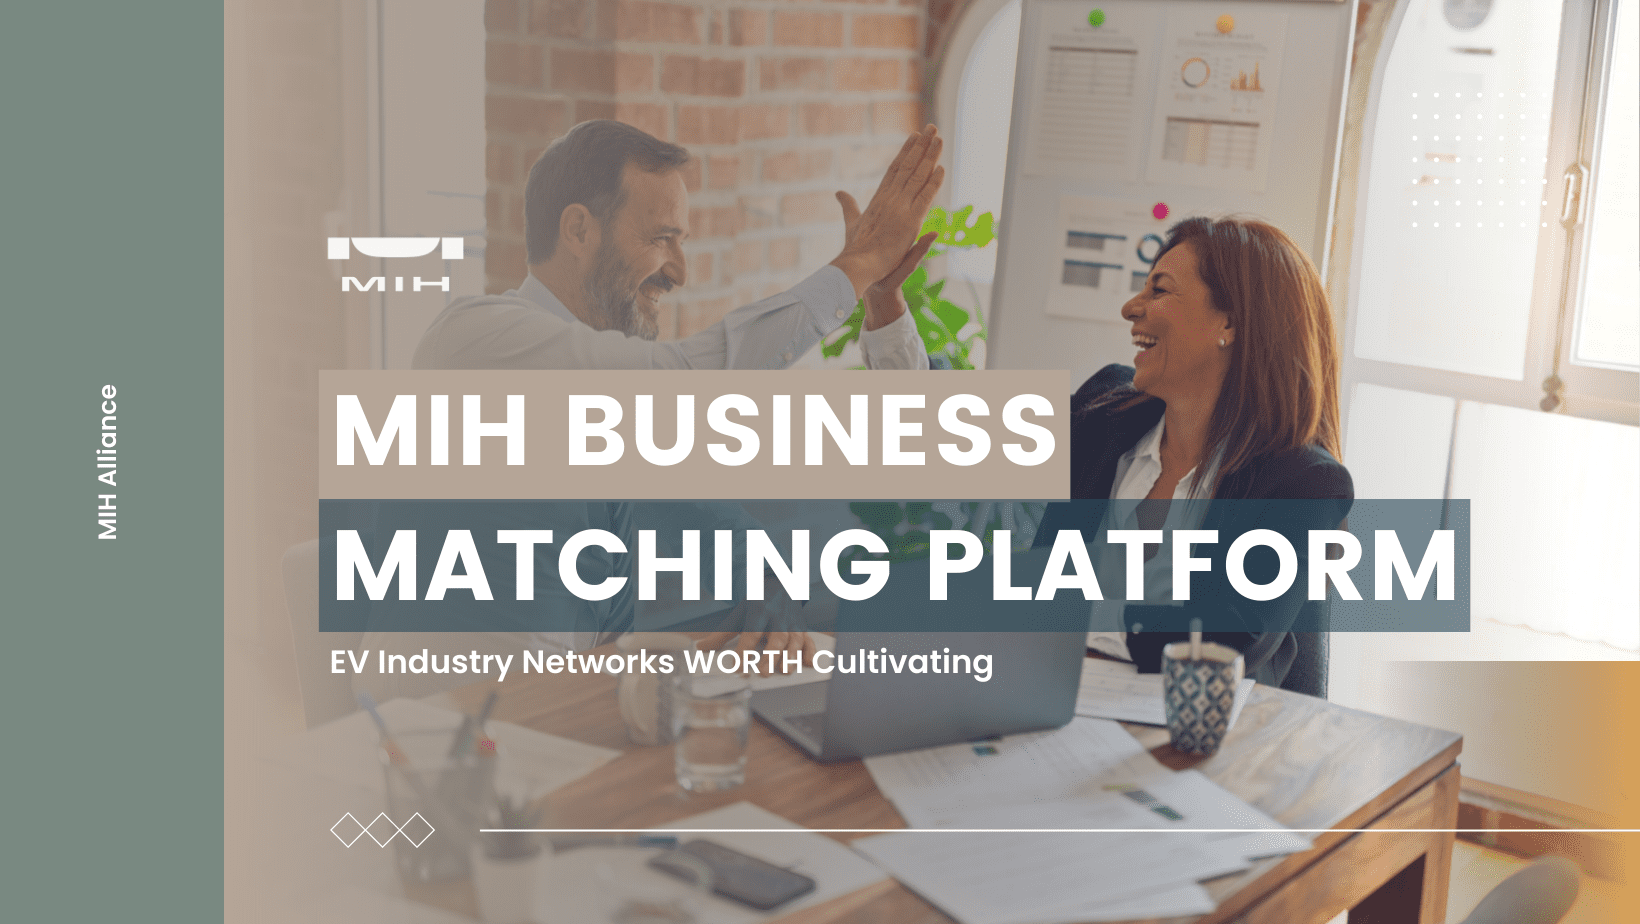 Subscribe to M+ Service and enjoy benefits from MIH Business Matching Platform!